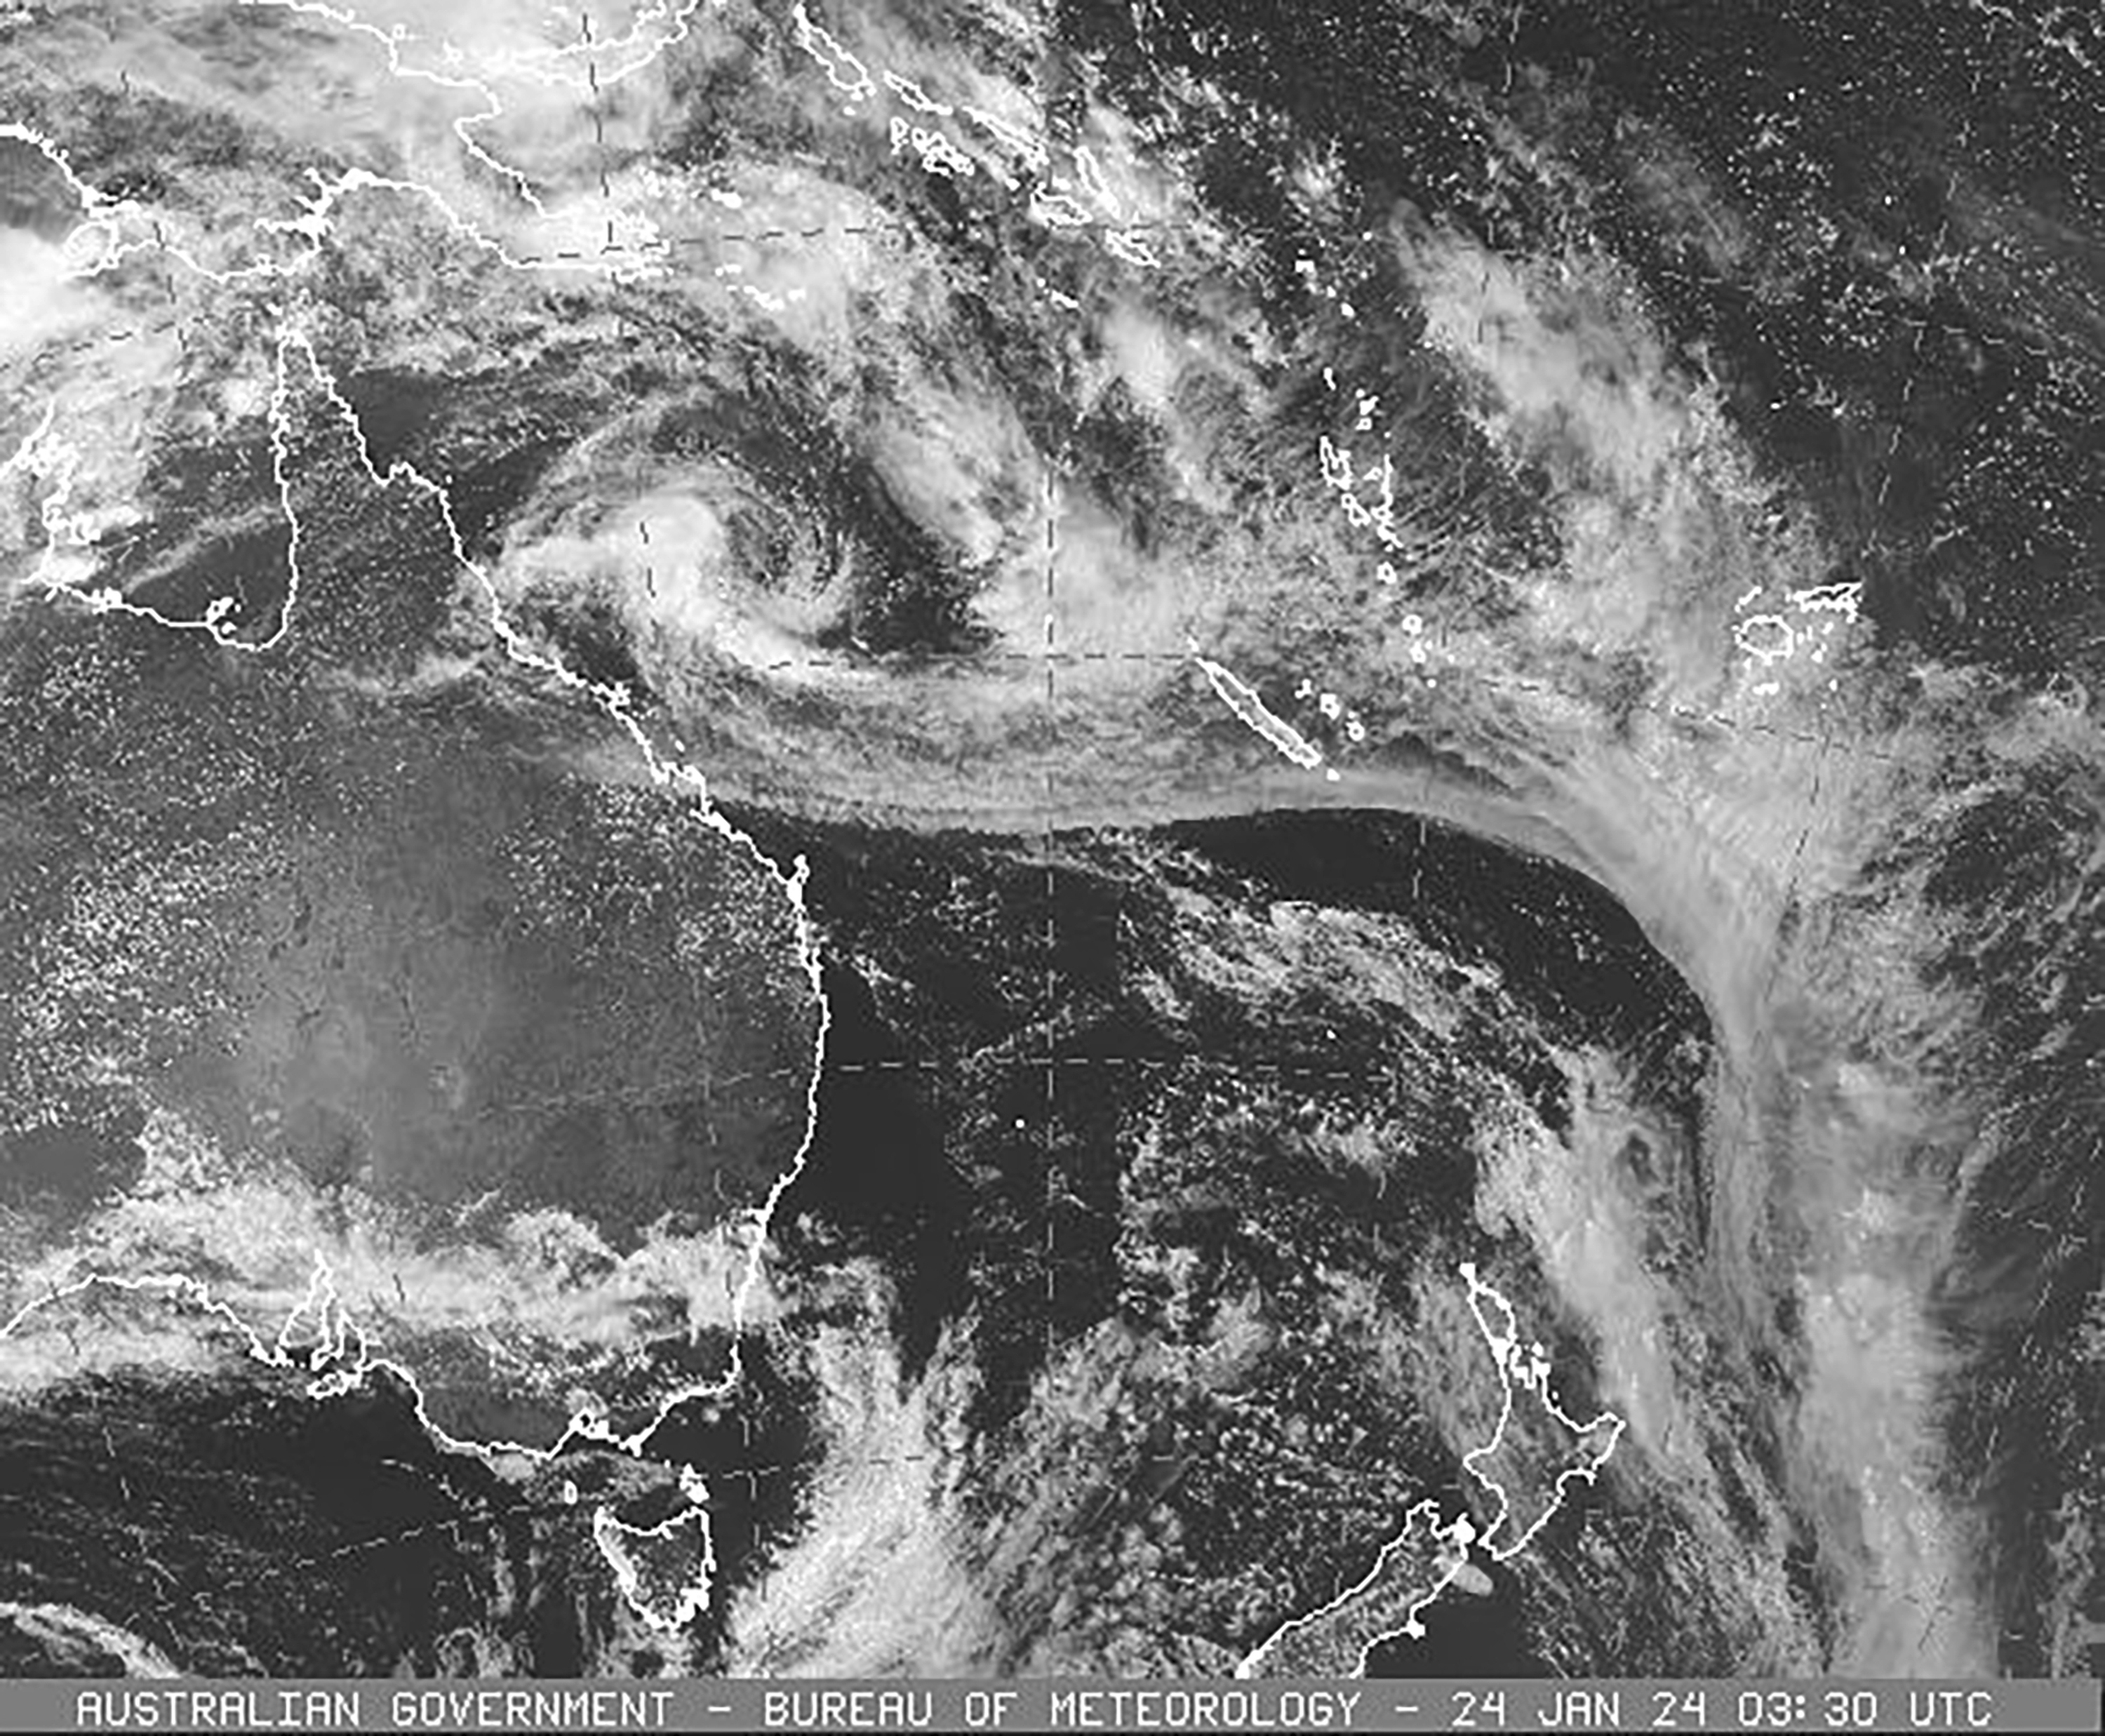 Tropical low off northeast Australia reaches cyclone strength